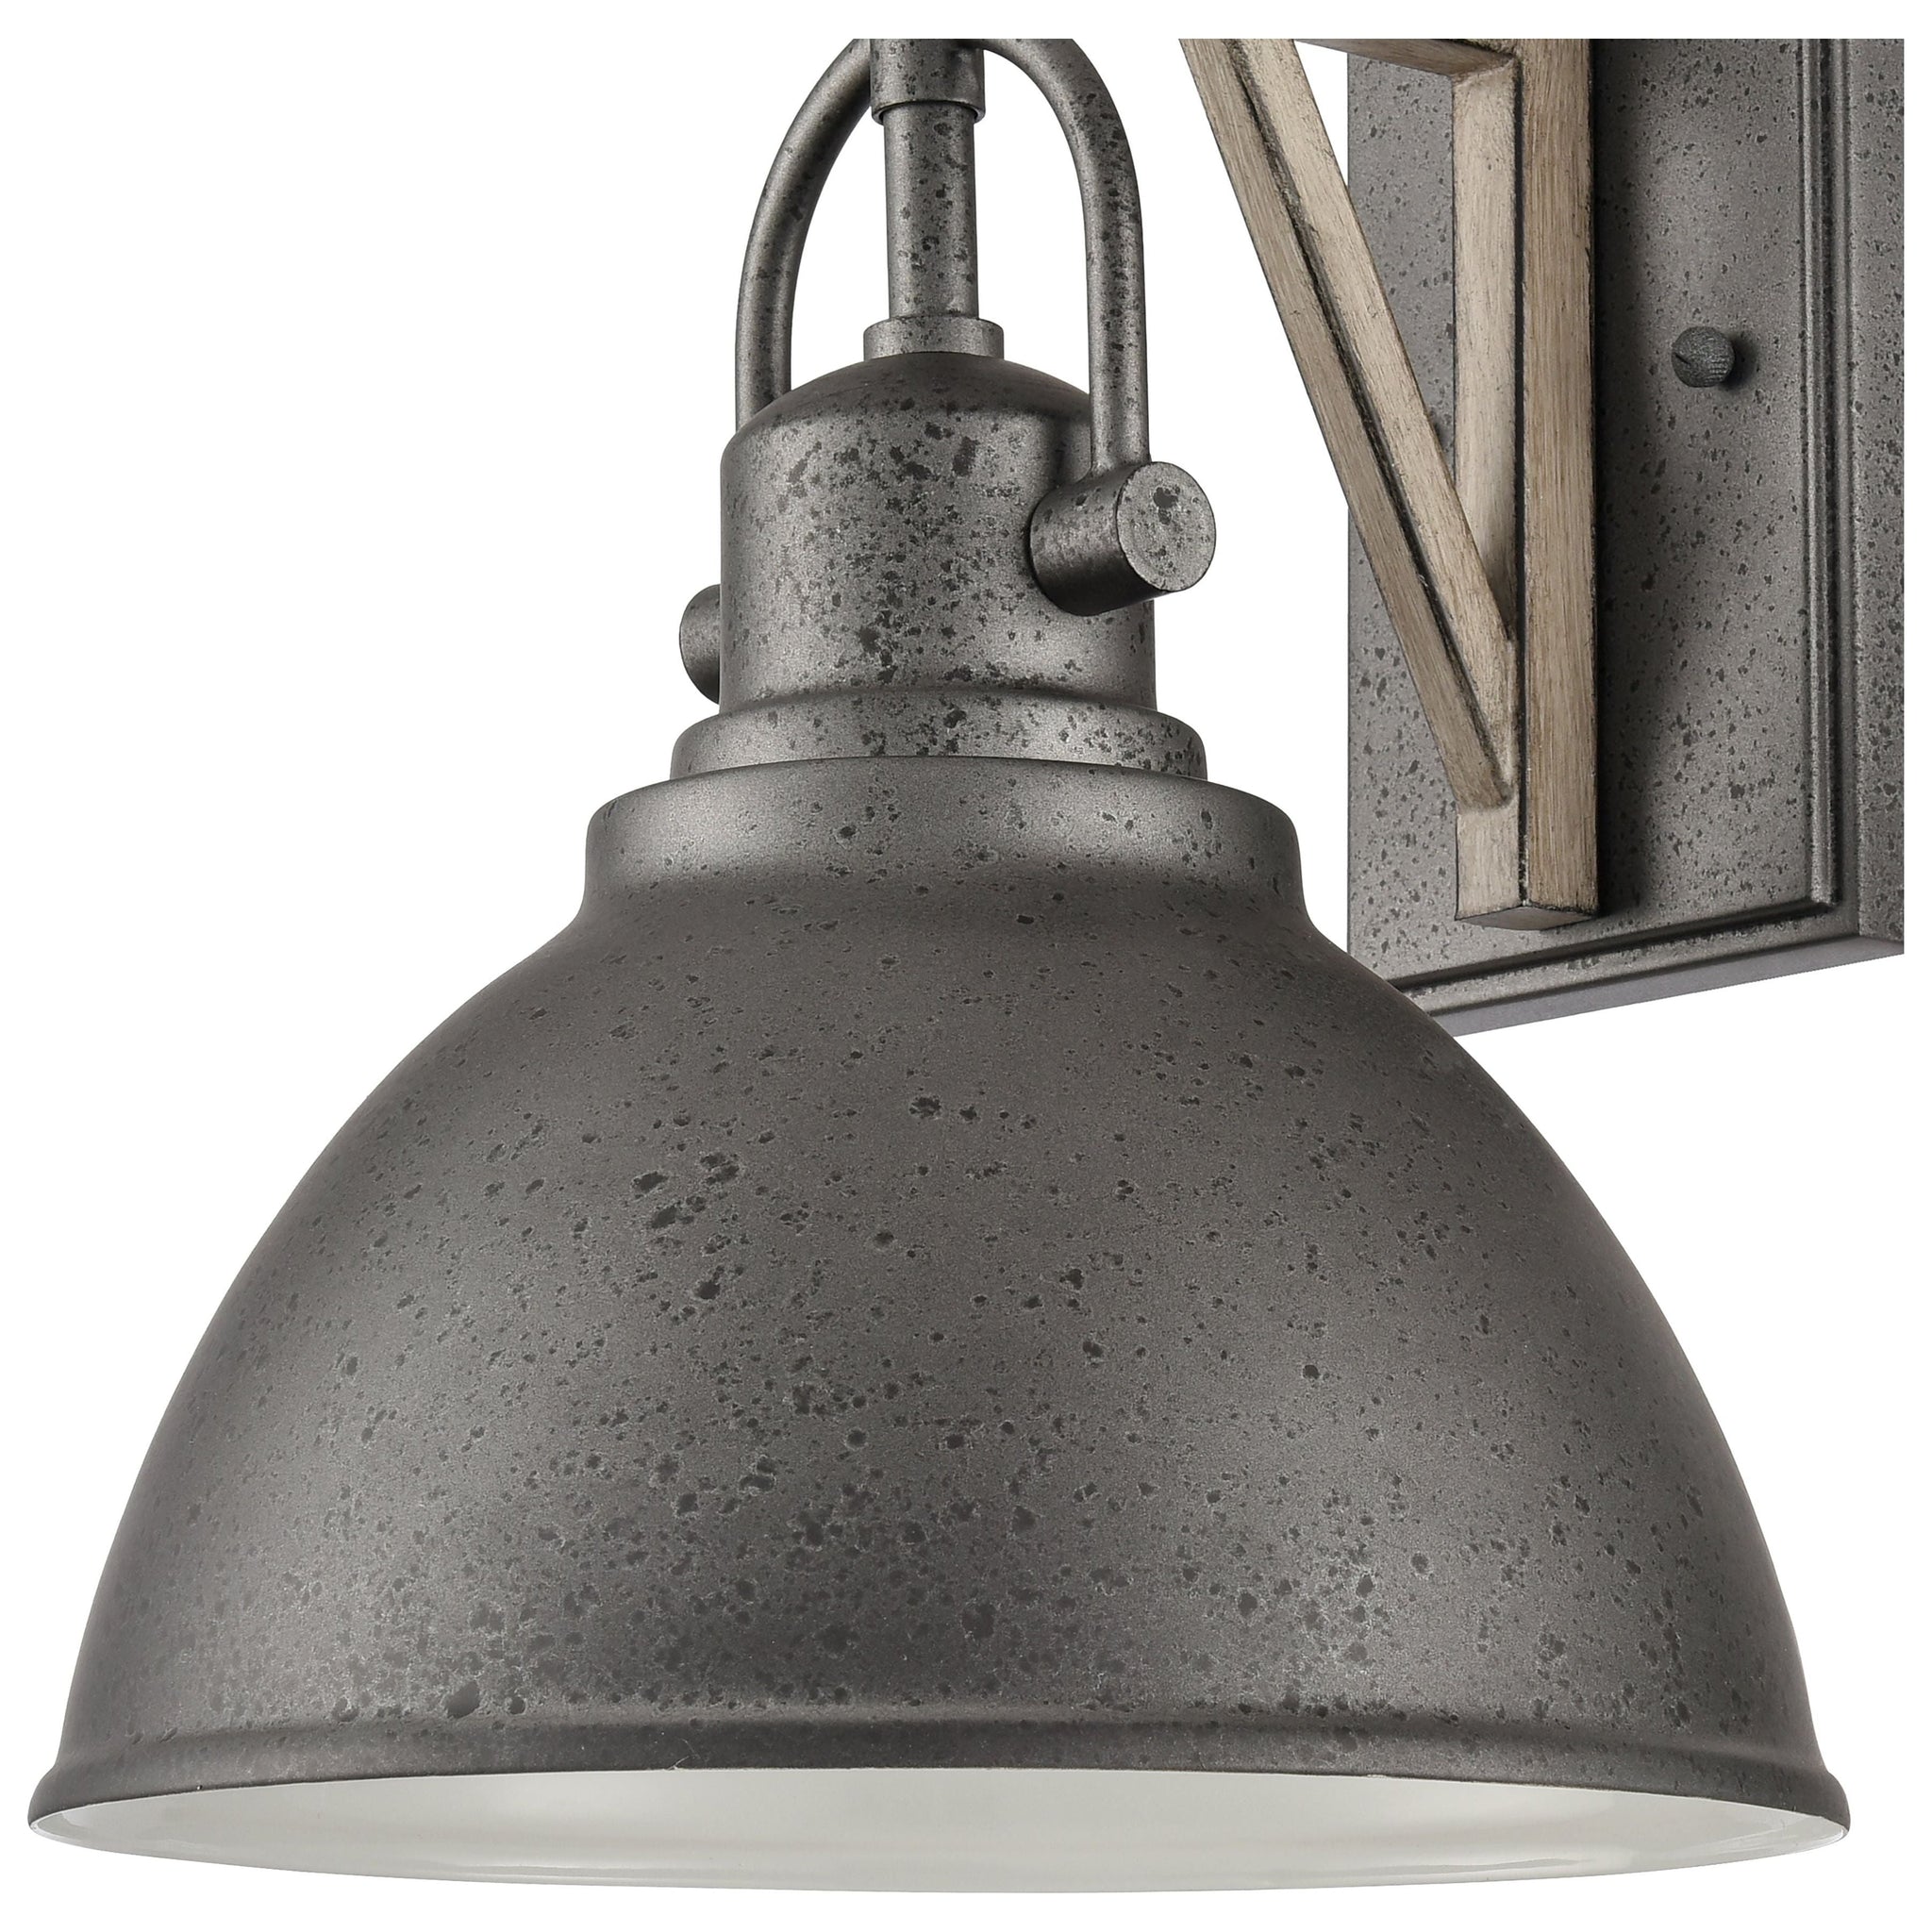 North Shore 12.25" High 1-Light Outdoor Sconce